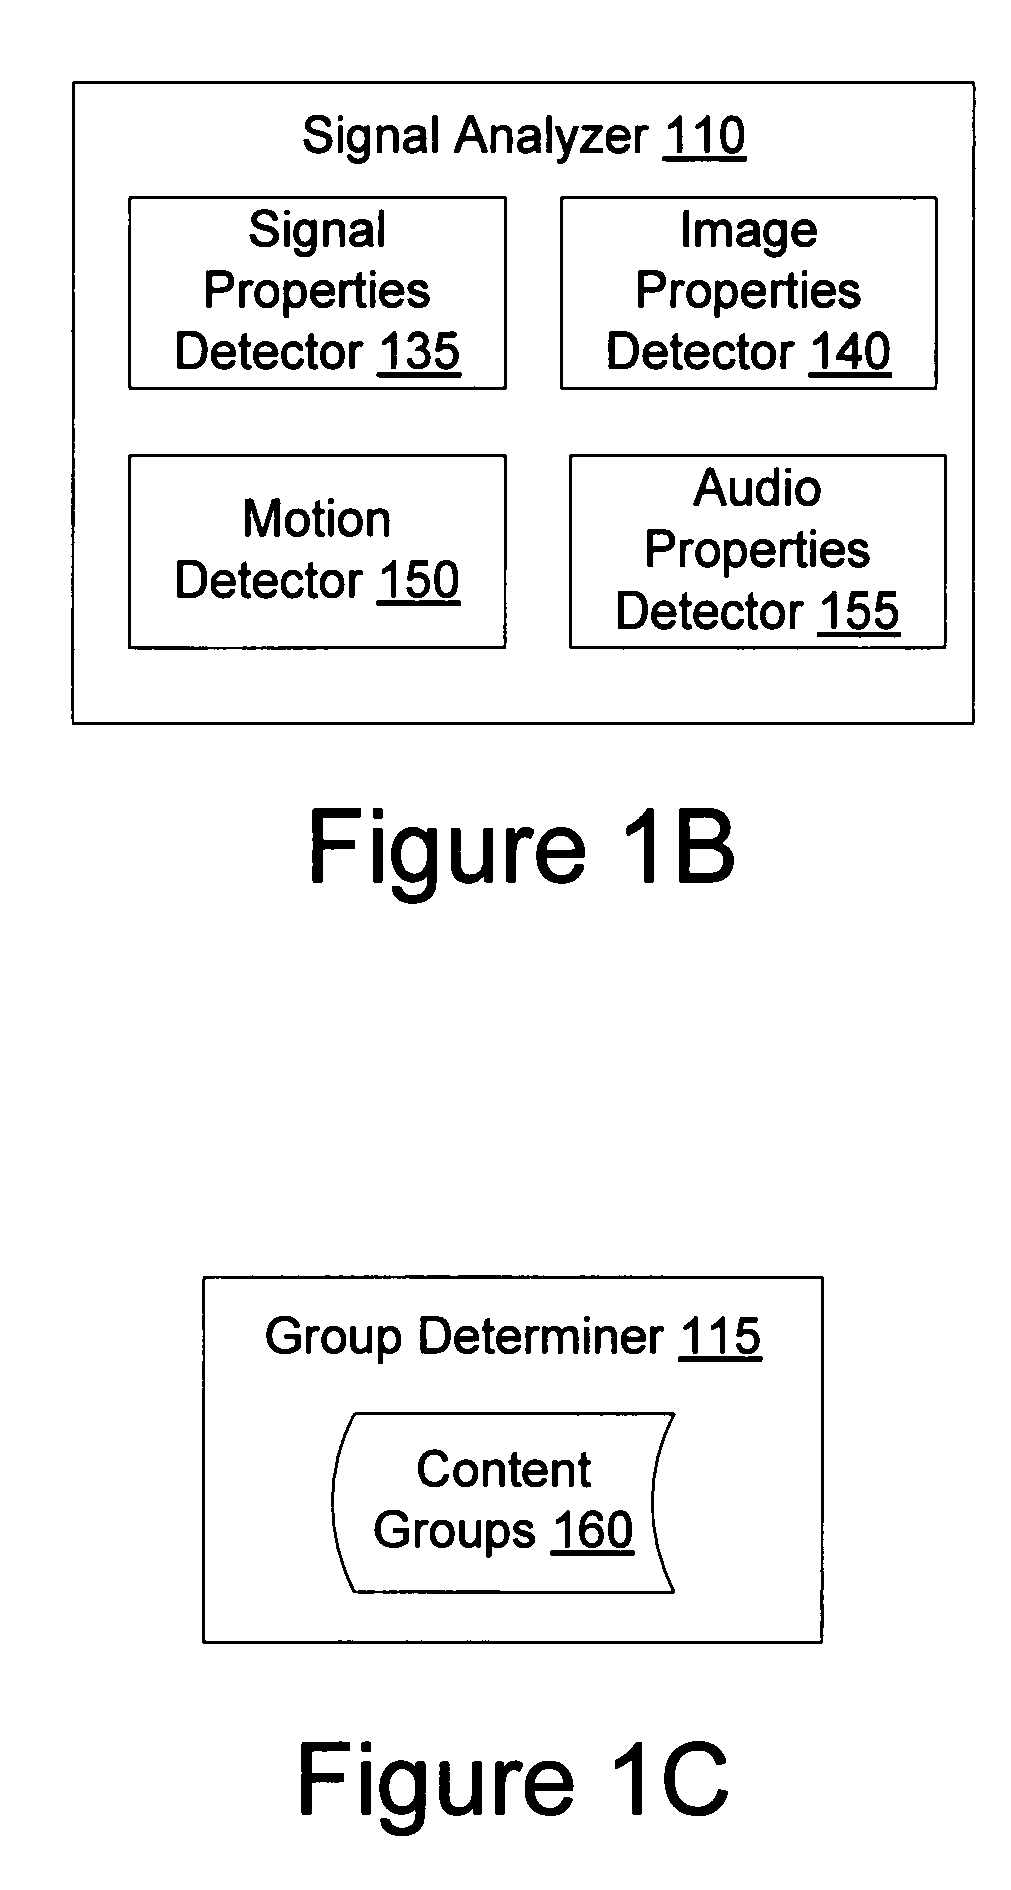 Content based adjustment of an image